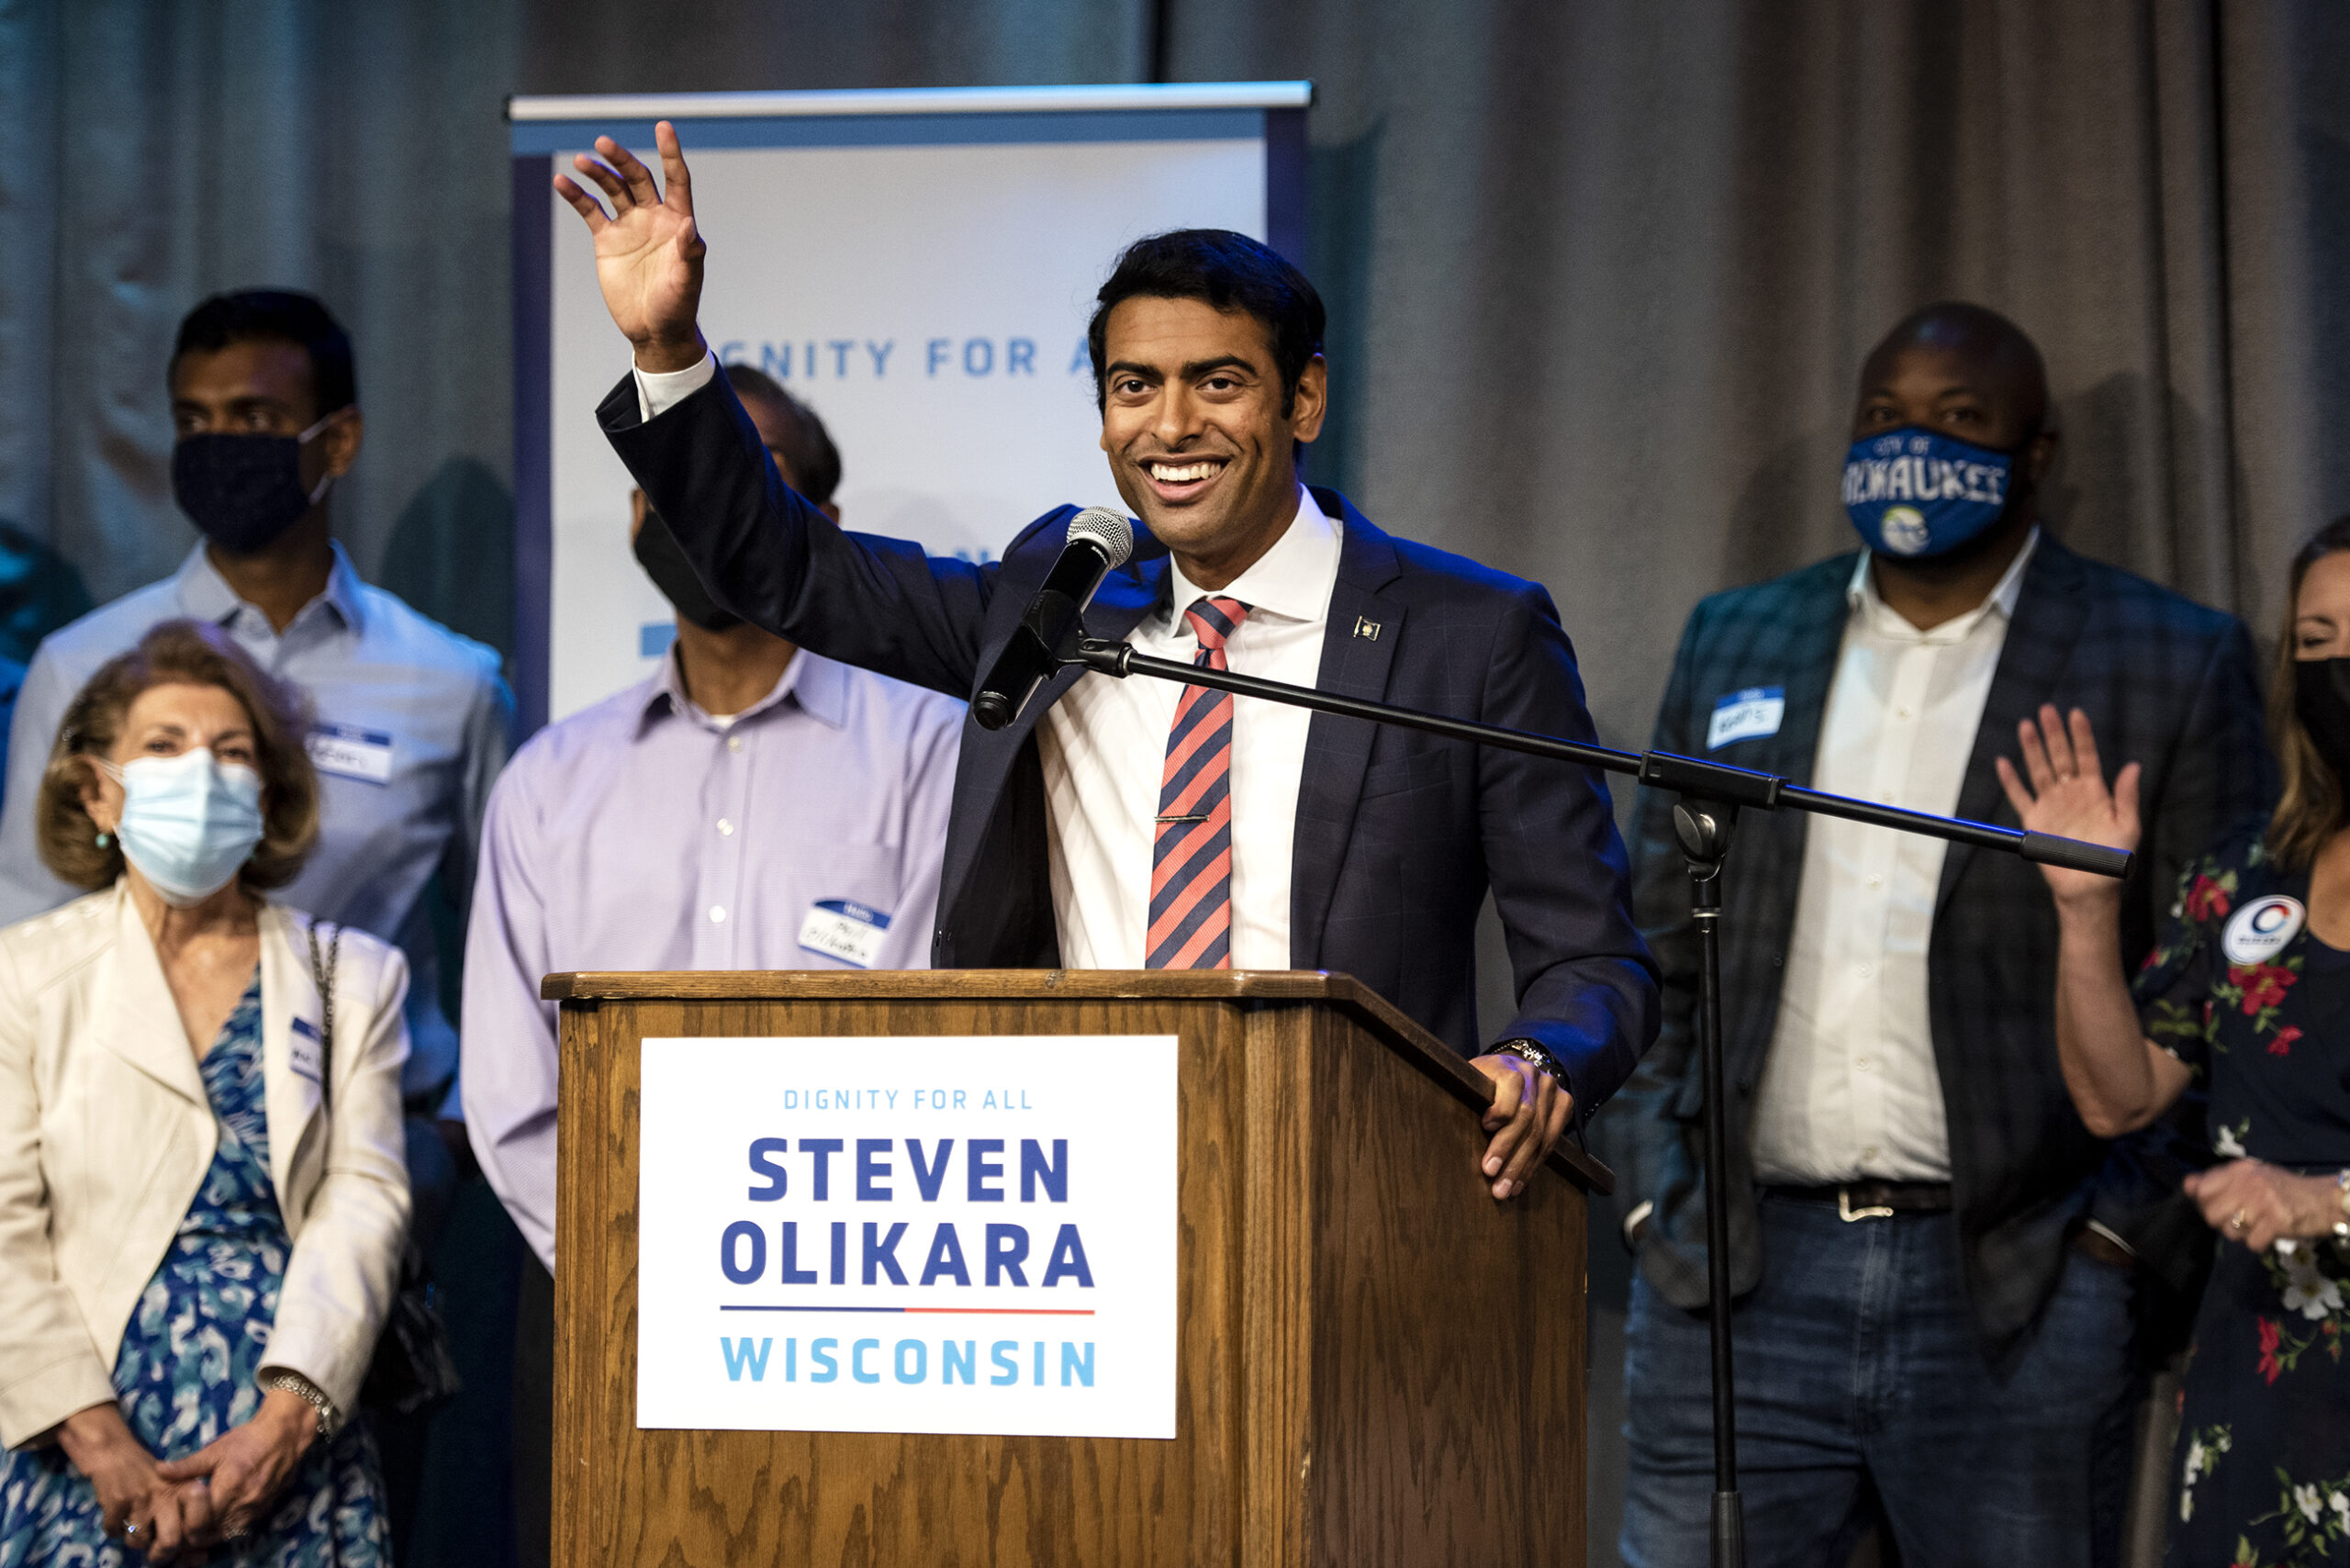 Steven Olikara smiles and waves from the podium. Supporters stand behind him.